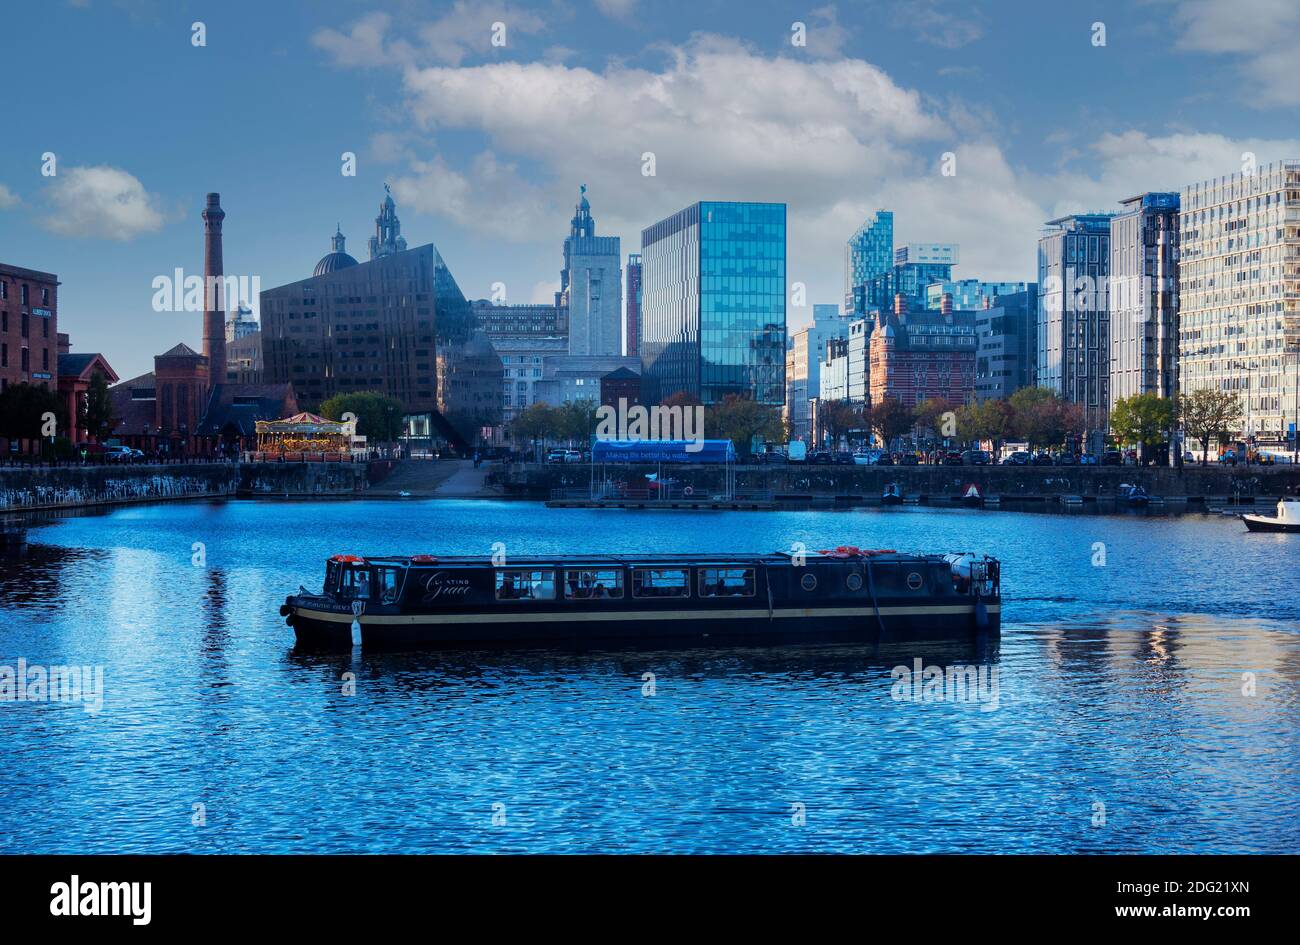 Barge carrying tourists at dusk in Royal Albert Dock in Liverpool Stock Photo